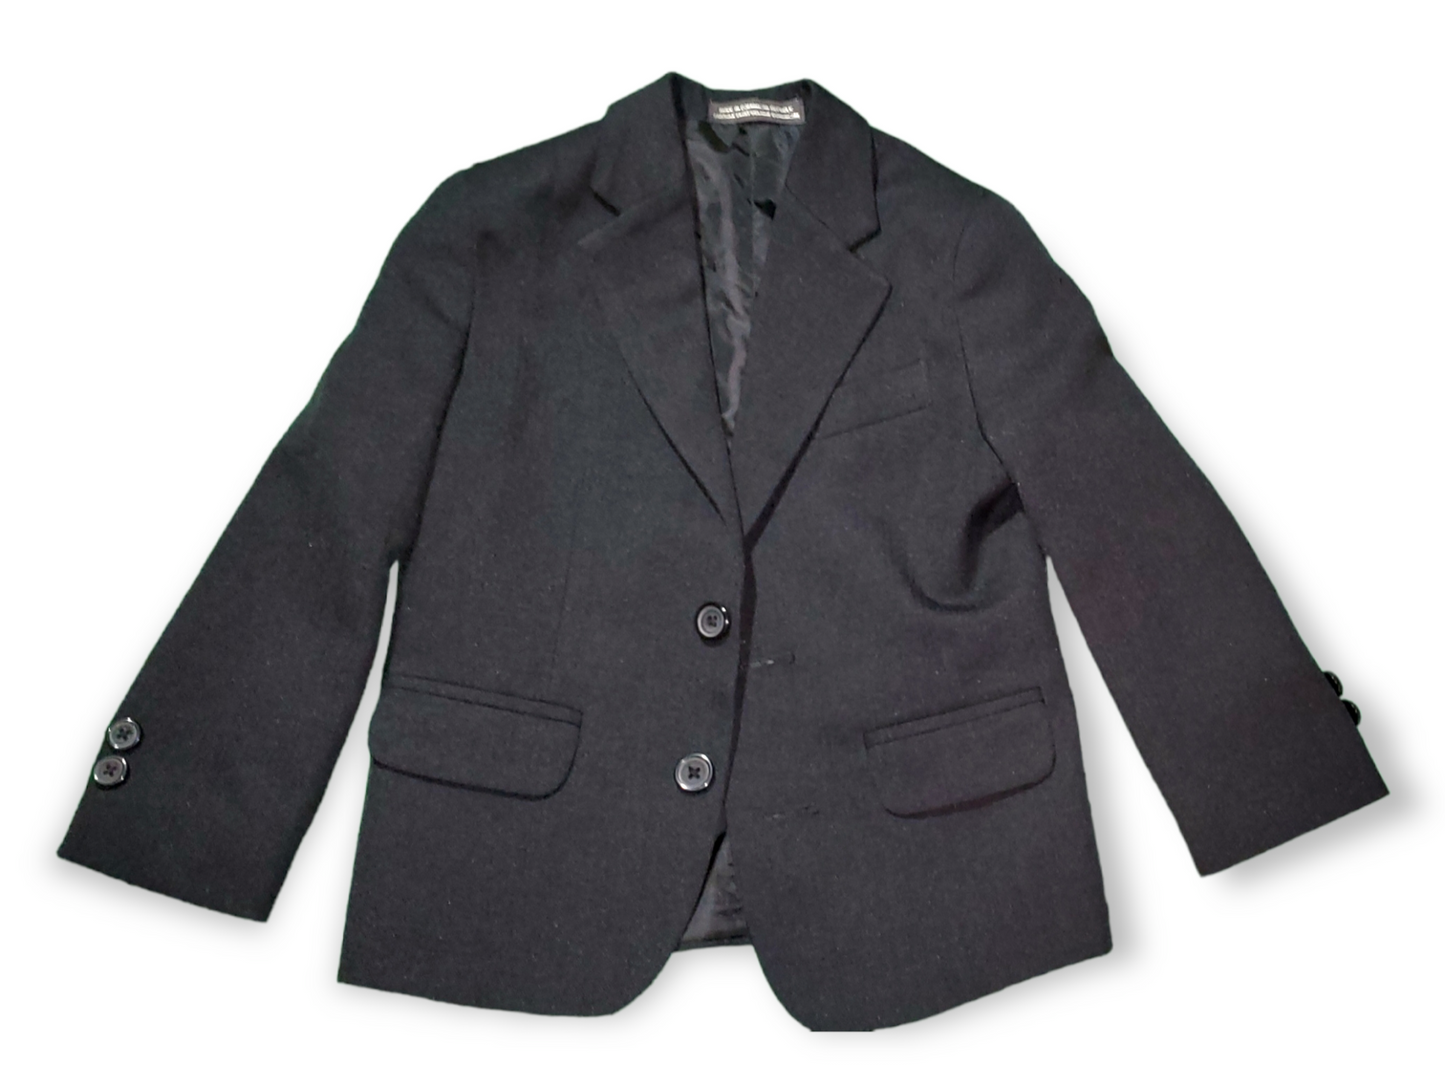 Toddler Suit Jacket 4T|Used